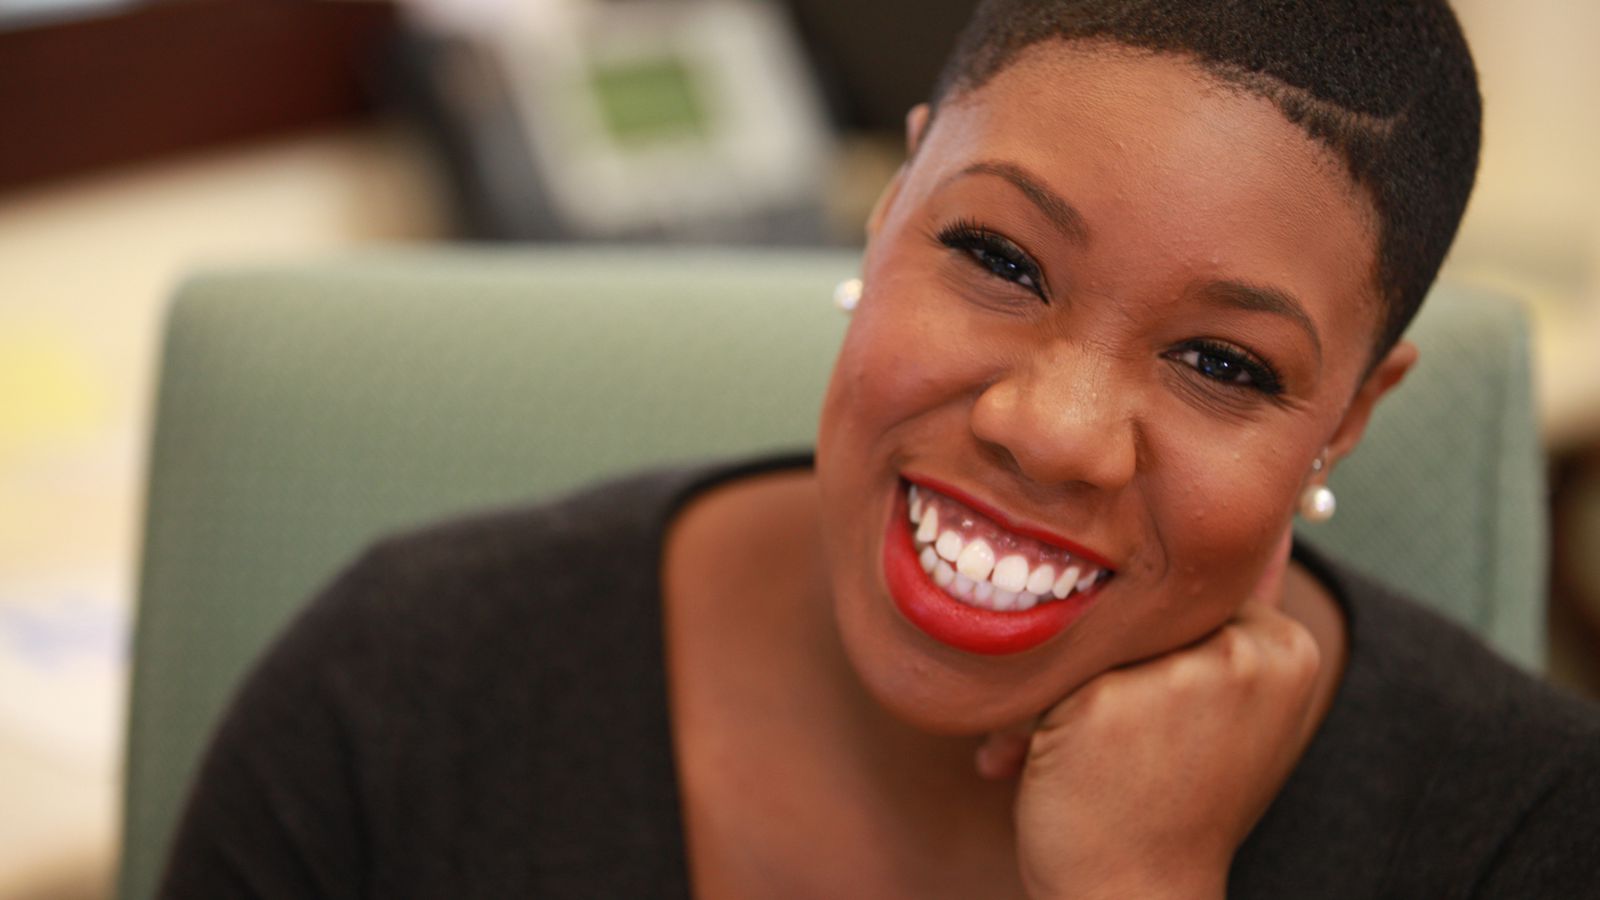 Bigot Of The Hour: Symone Sanders | Life, liberty & the non-pursuit of